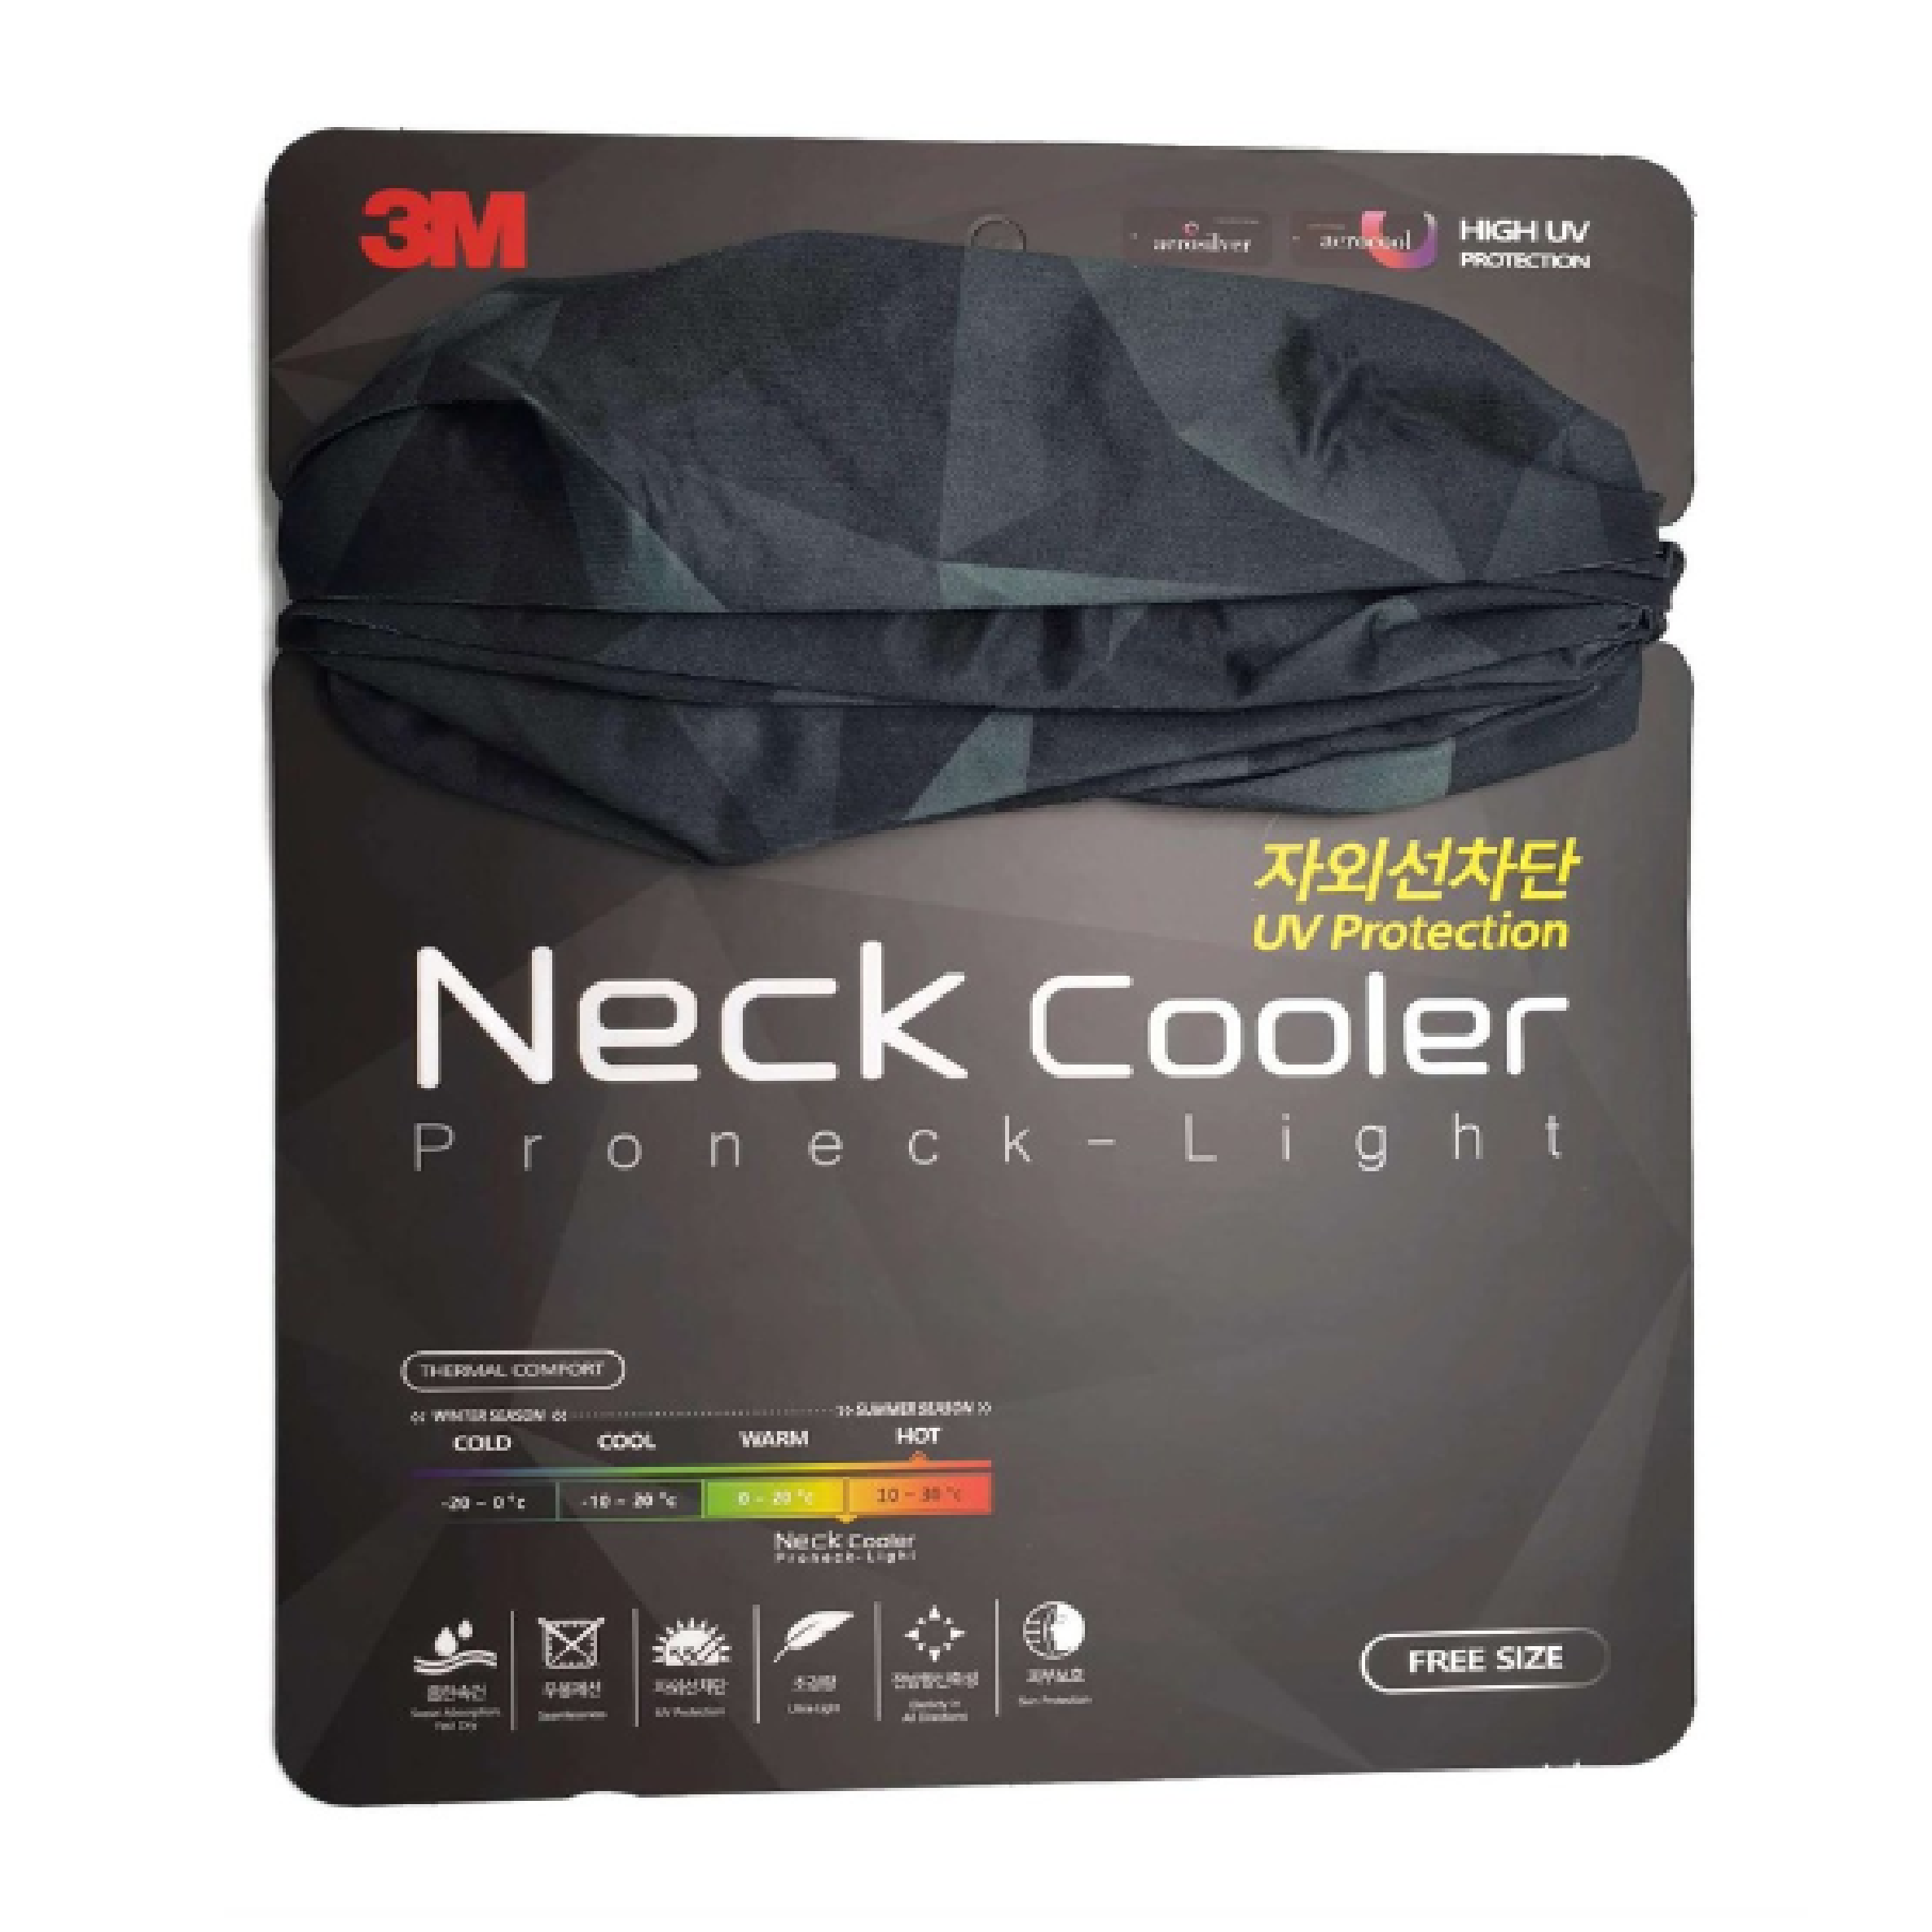 3M NECK COOLER High UV Protection (Sports Scarf & Bandanna)